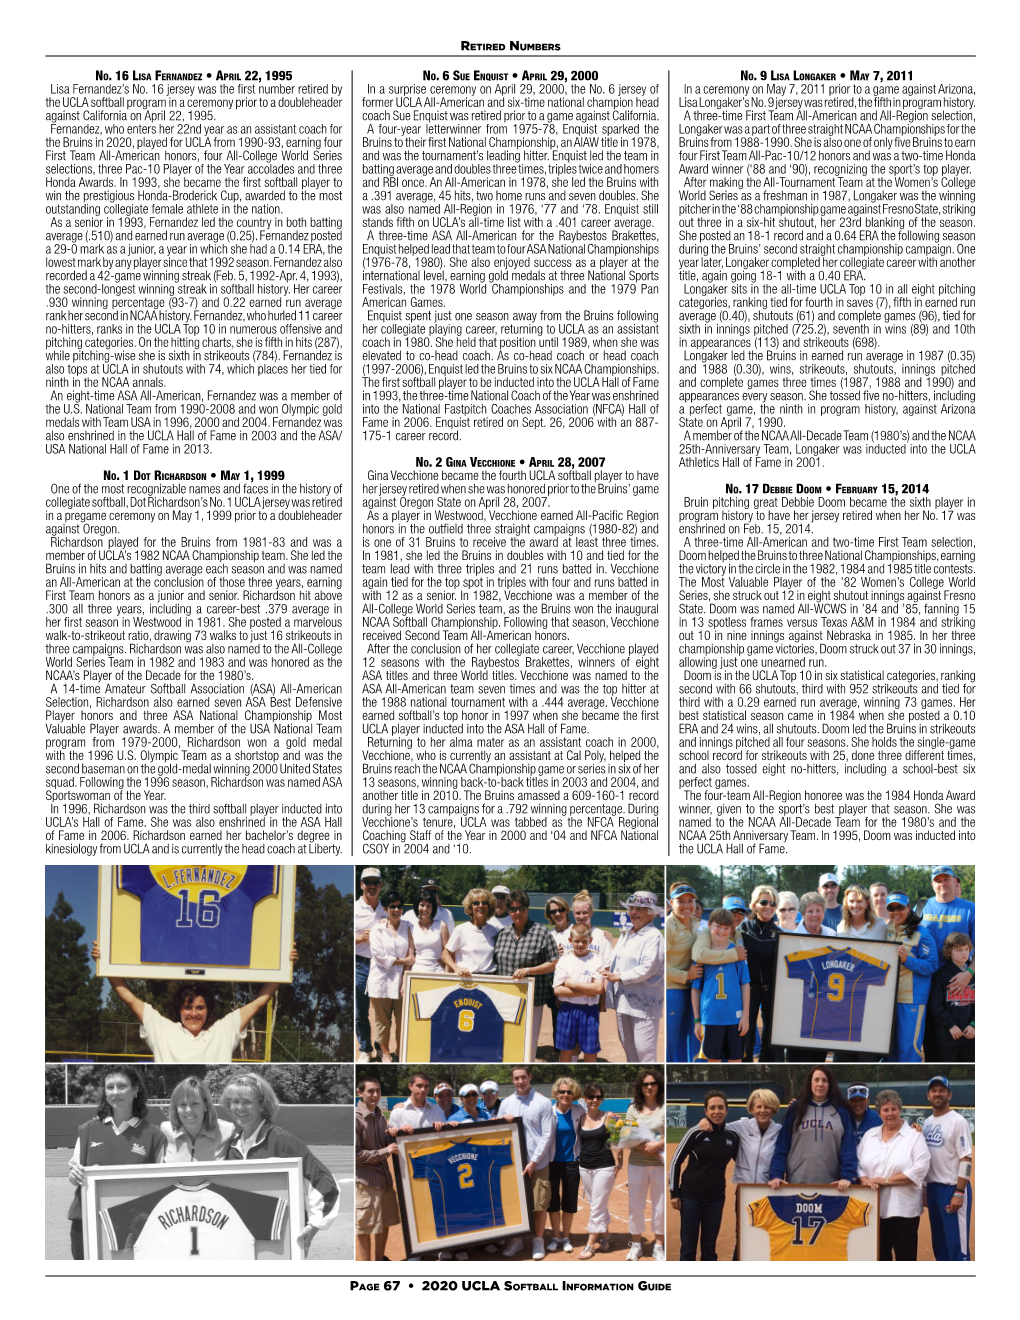 PAGE 67 • 2020 UCLA SOFTBALL INFORMATION GUIDE Lisa Fernandez's No. 16 Jersey Was the First Number Retired by the UCLA